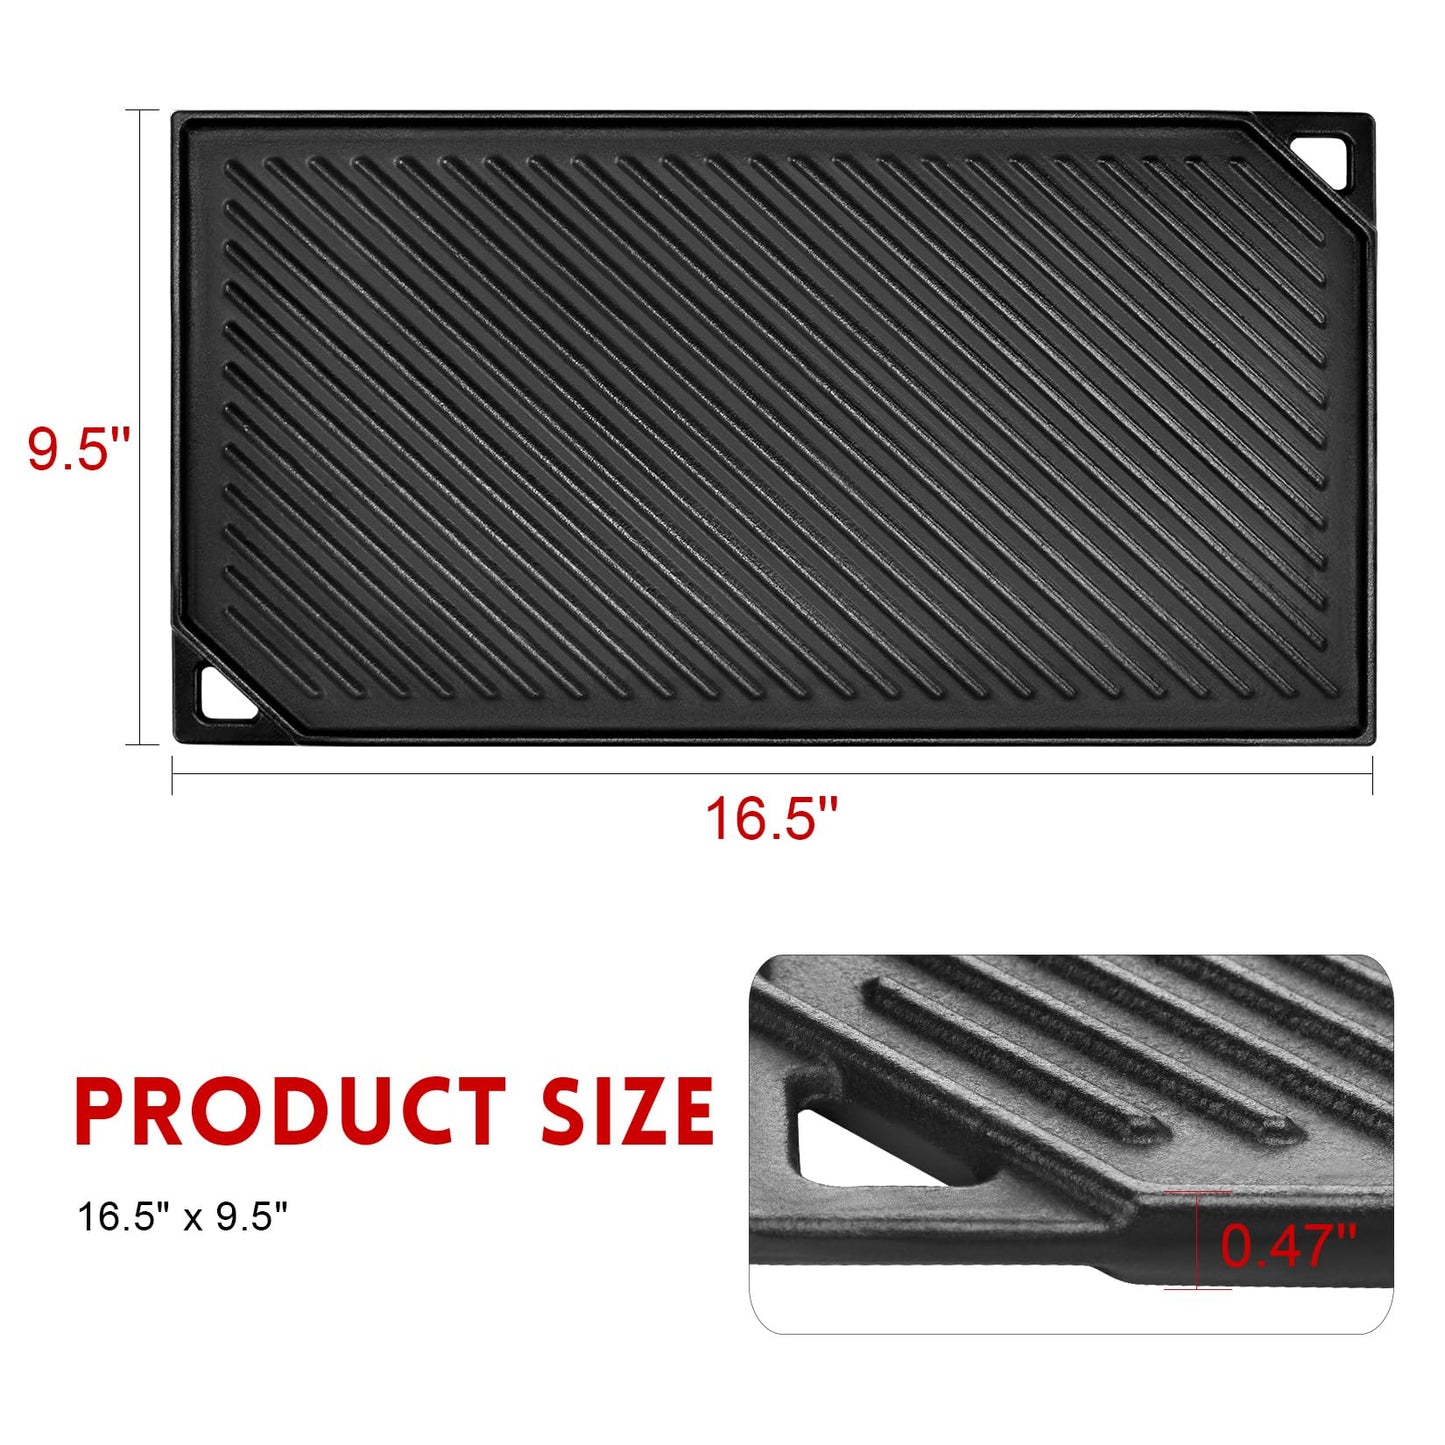 GGC Reversible Cast Iron Griddle, Double-sided Griddle Pan for Stove Tops, Gas Grills and Outdoor Cooking, 16.5 x 9.5 Baking Flat and Ribbed Griddle Plate